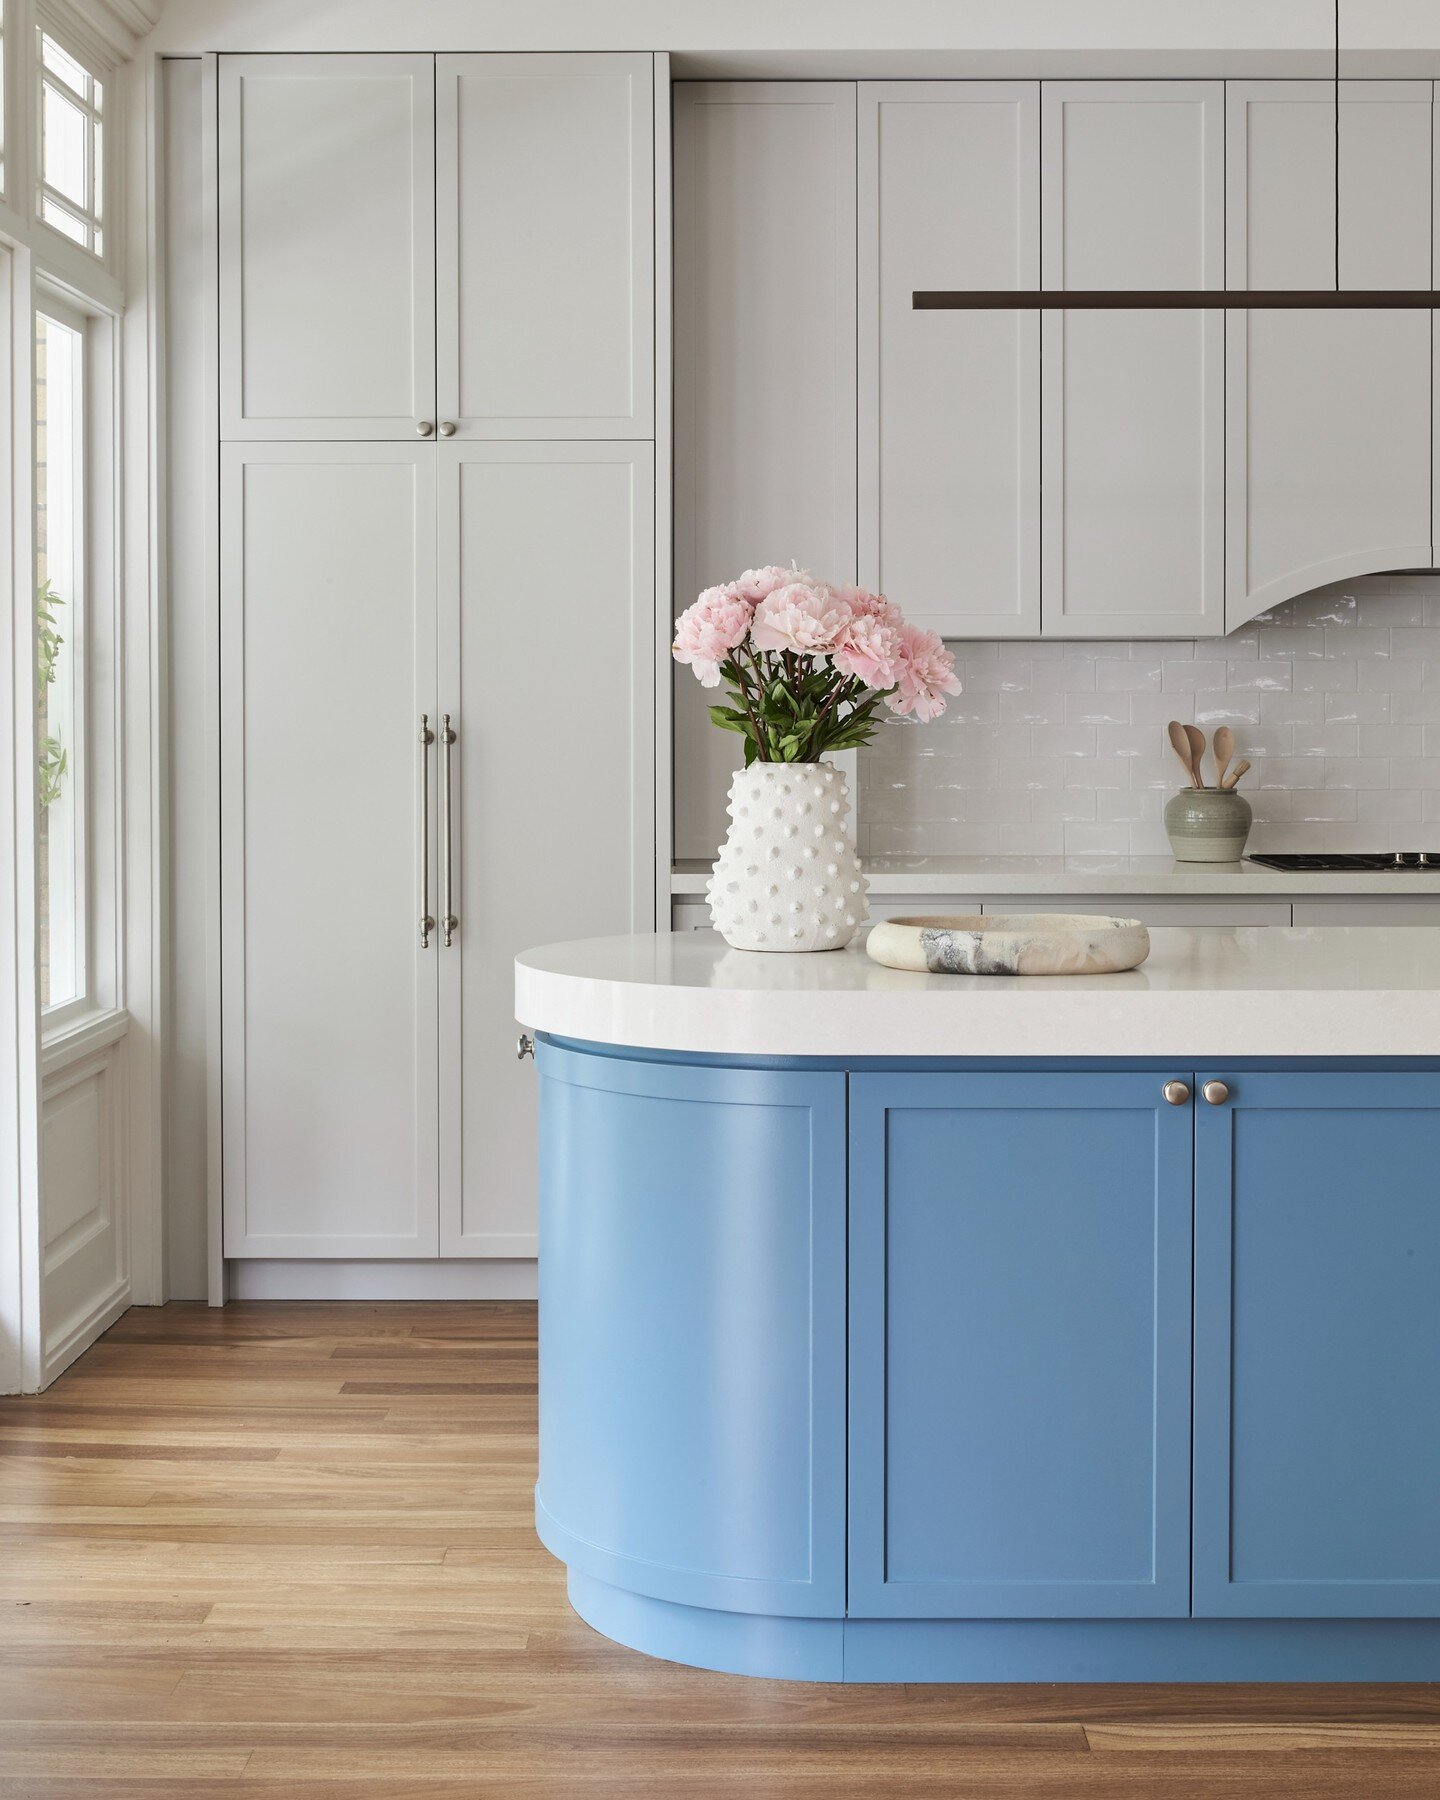 Do you just love an integrated coffee station pantry?? Swipe right.
We certainly do, and we have so many clients requesting this clever inclusion right now. 
As seen in the always beautiful, blue Kitchen from our #dvdsmosman2project

Build by @tranqu